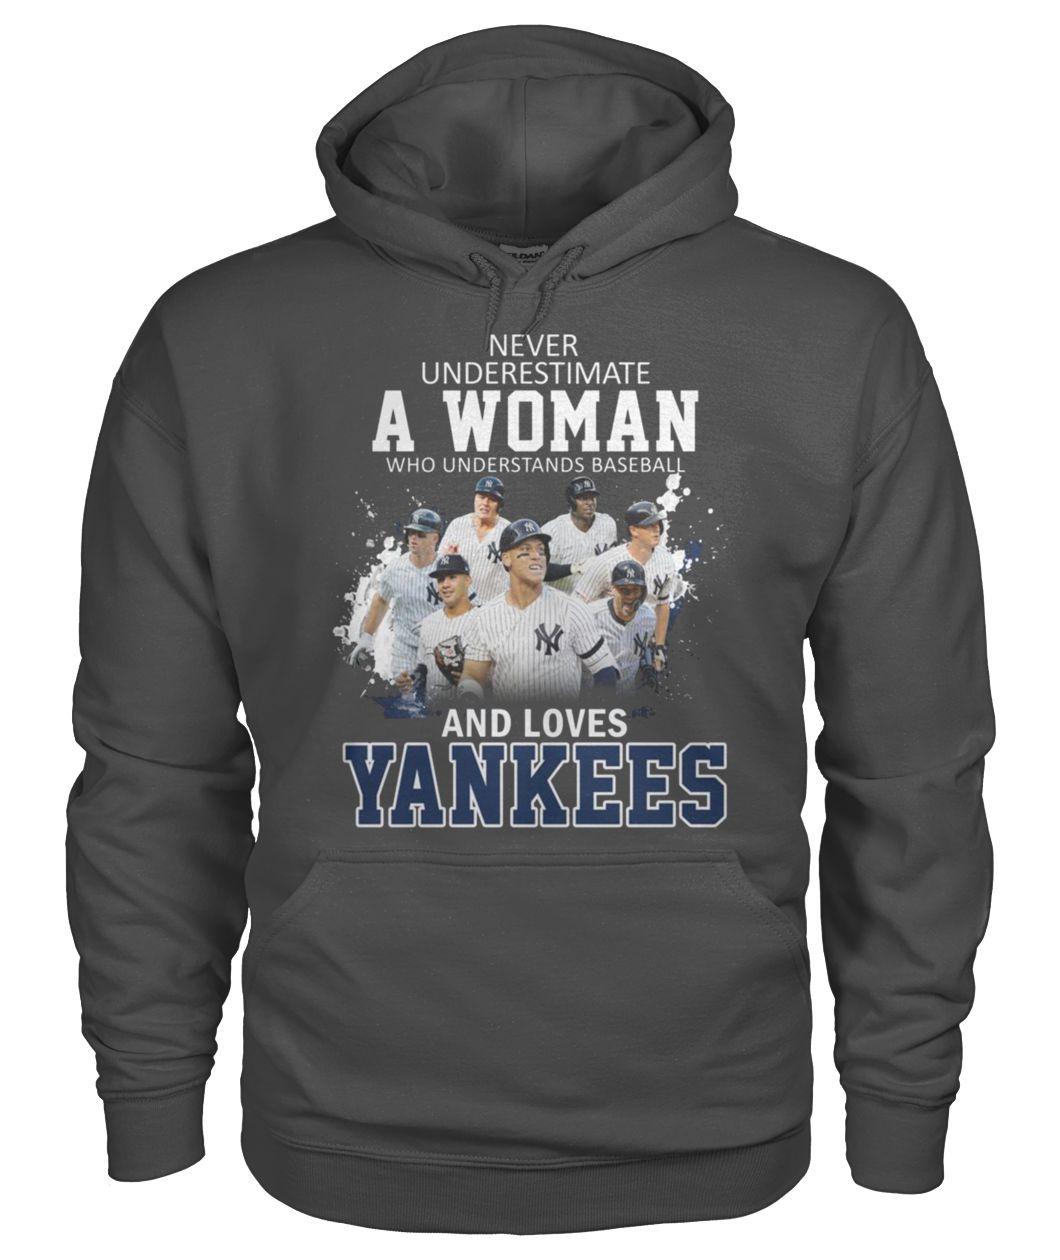 Never underestimate a woman who understands baseball and loves the yankees hoodie